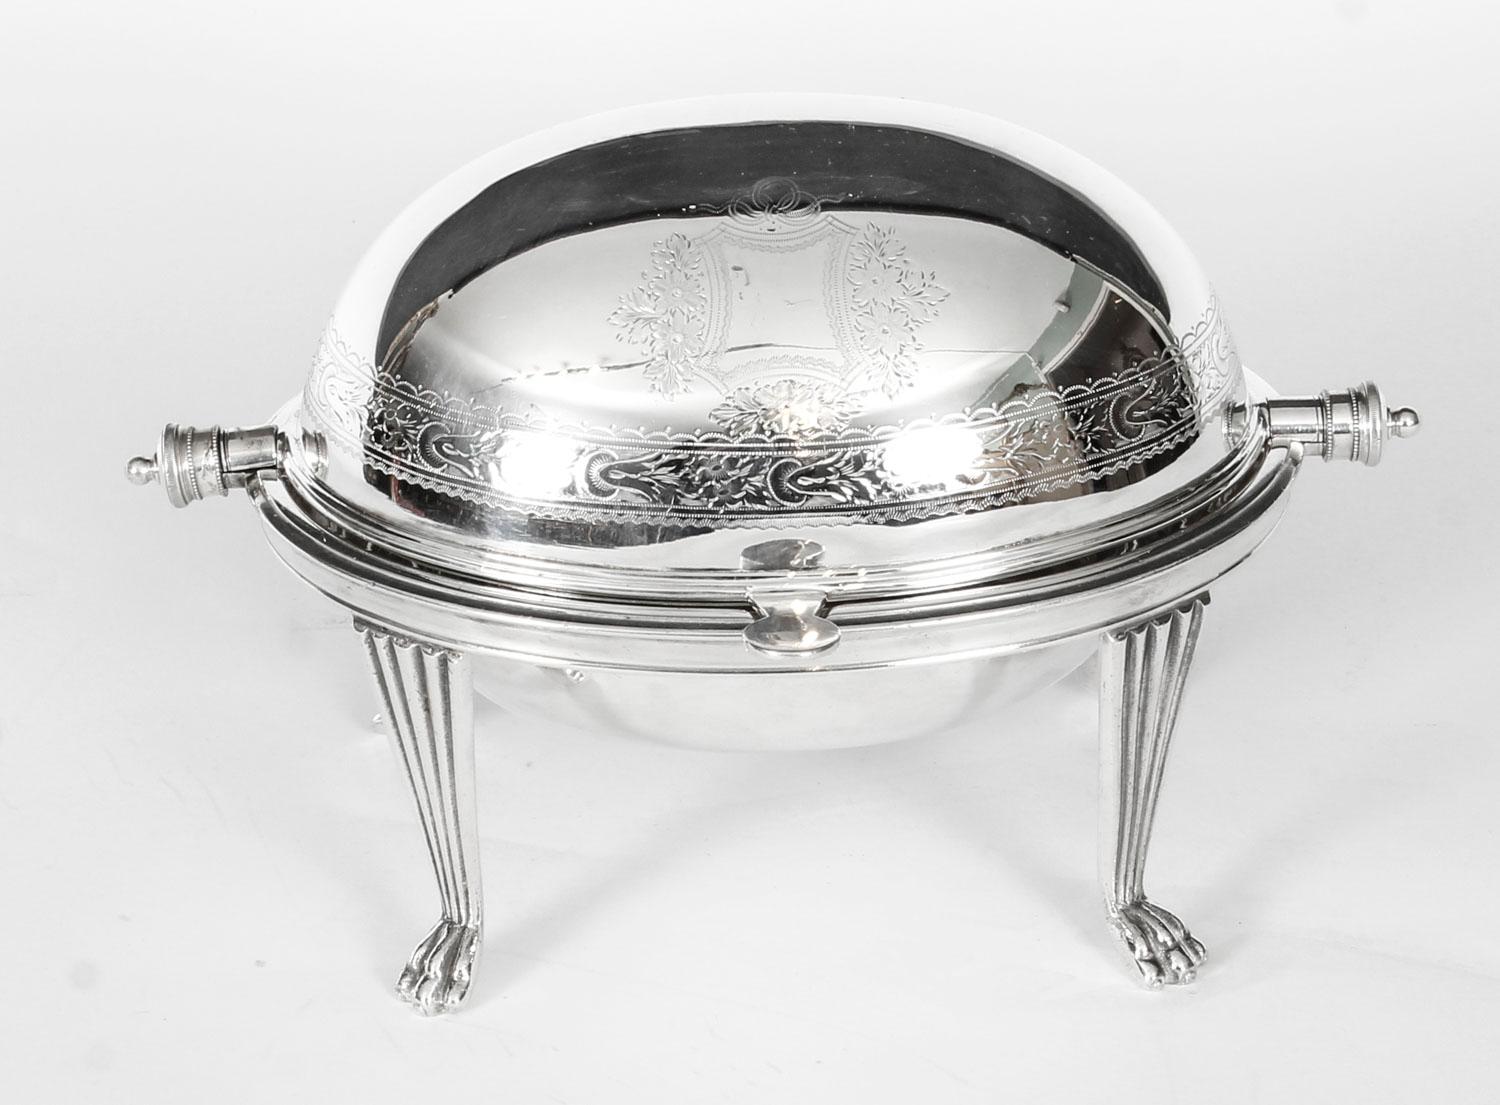 This is a gorgeous antique English Victorian silver plated roll over butter dish, circa 1870 in date.

With superb engraved and cast decoration the underside bearing the makers mark of the renowned silversmiths Mappin & Webb, Princes Plate.

It